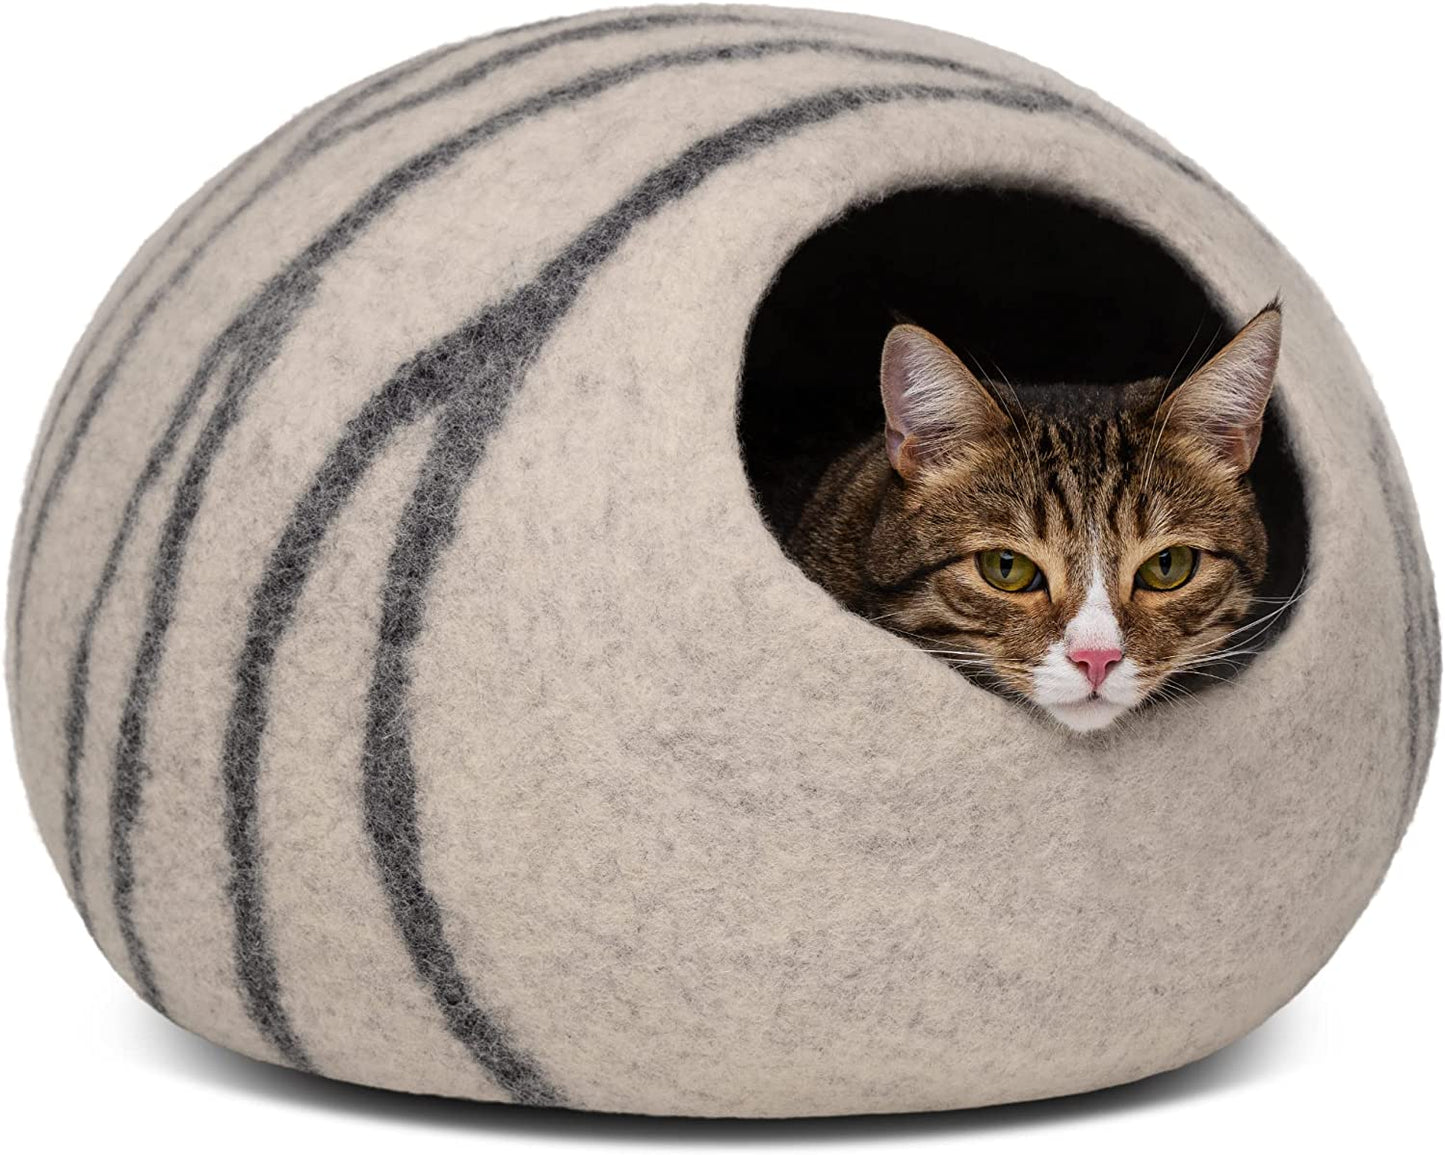 Premium Felt Cat Bed Cave - Handmade 100% Merino Wool Bed for Cats and Kittens (Light Shades) (Large, Light Grey)